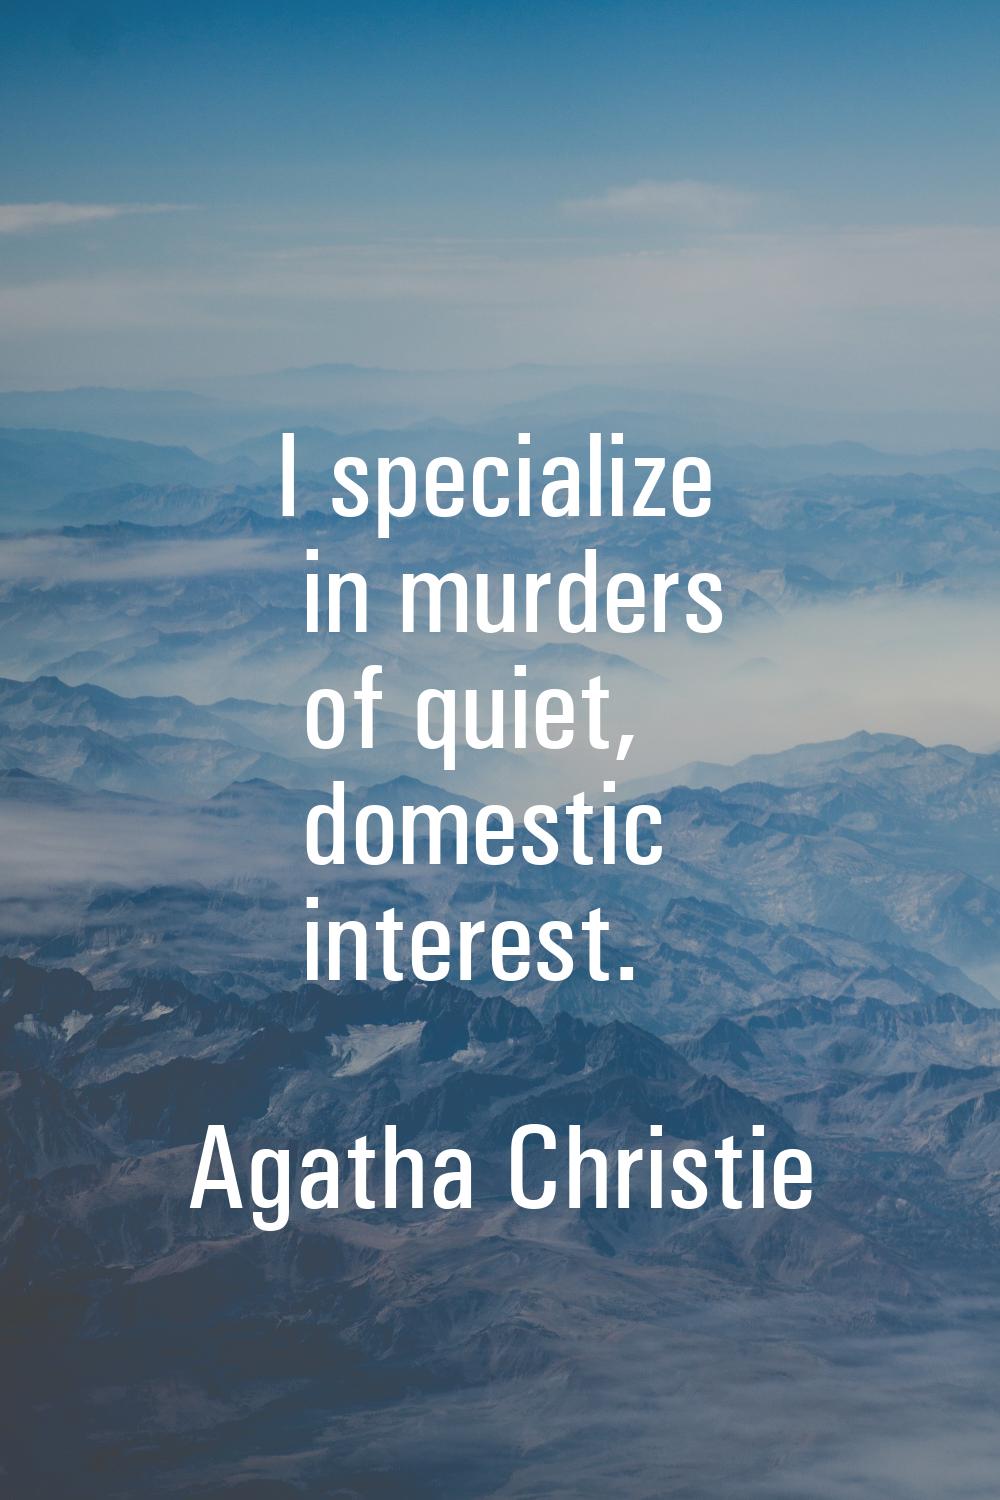 I specialize in murders of quiet, domestic interest.